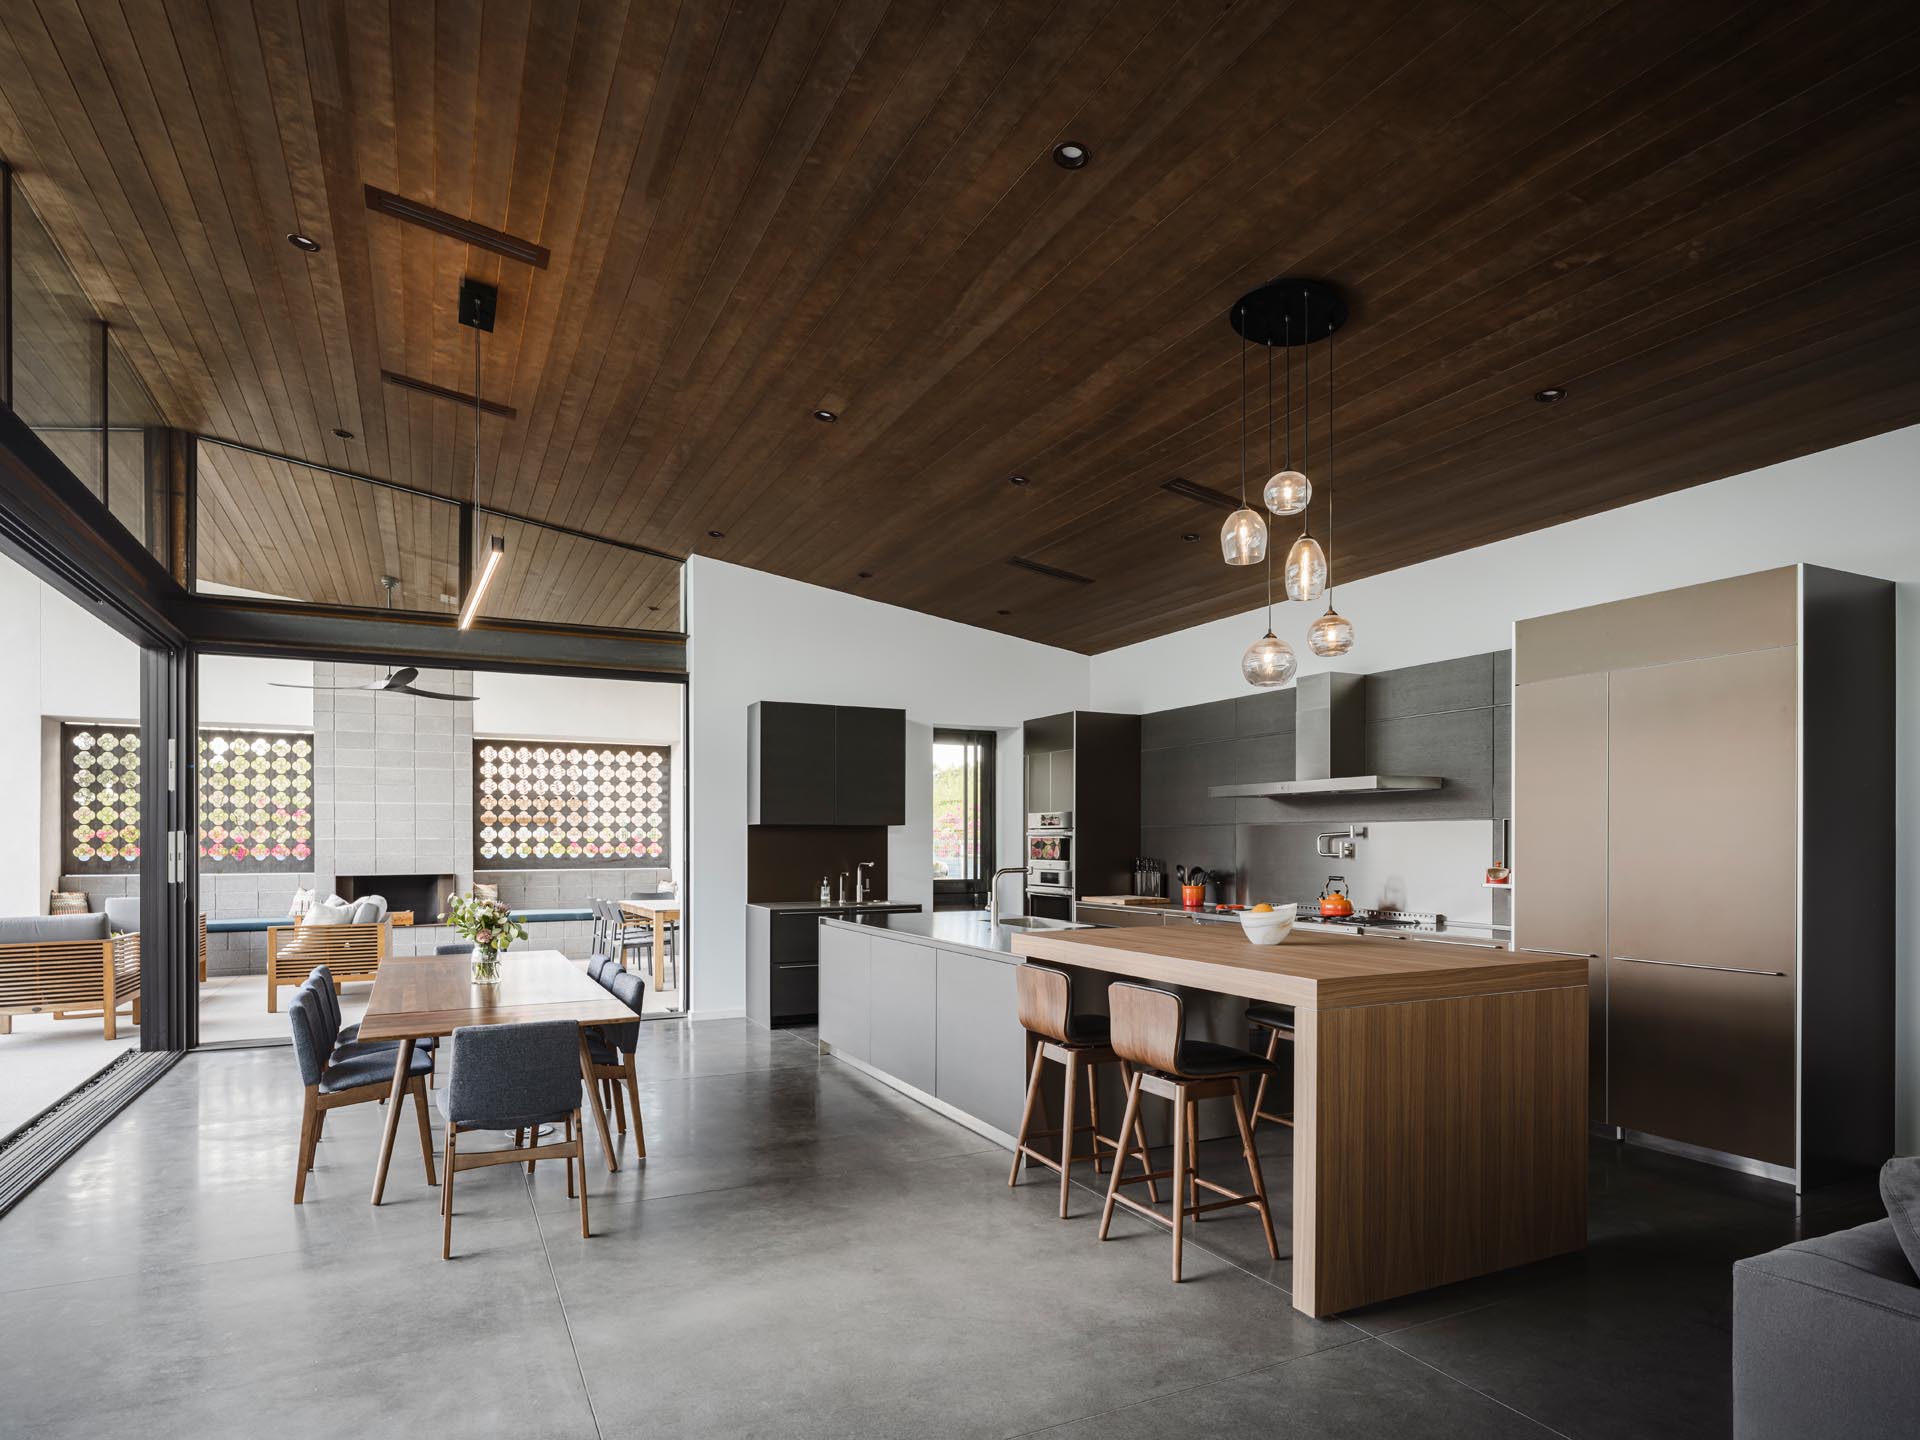 The open plan dining room and kitchen of this modern home includes concrete flooring, a wood dining table, and a large kitchen with an expansive island with a raised section that acts as a bar.